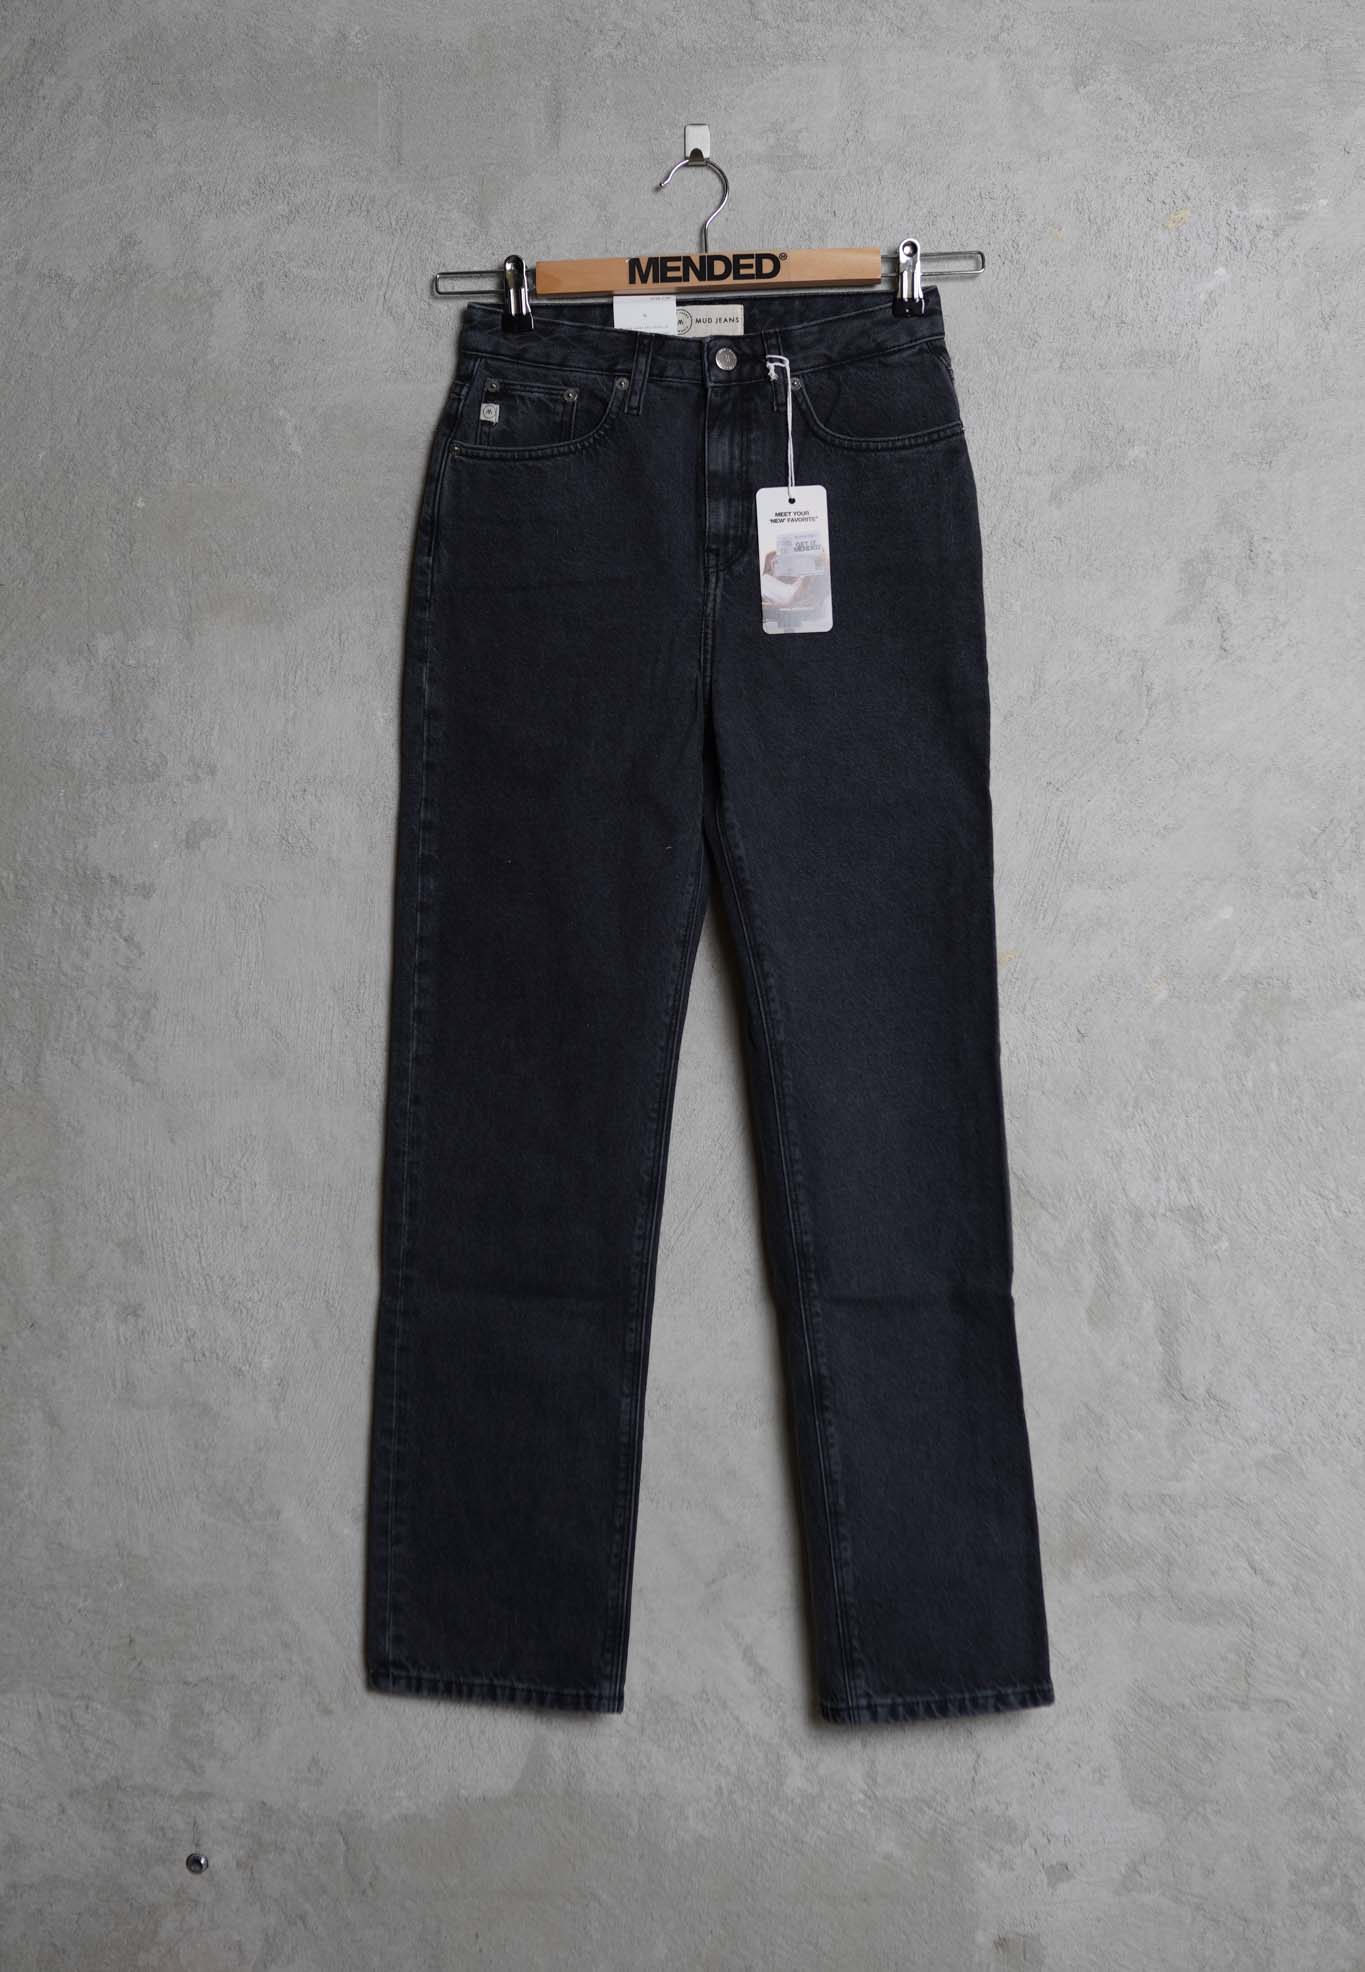 Women - MUD Jeans - Relax Rose - Used Black